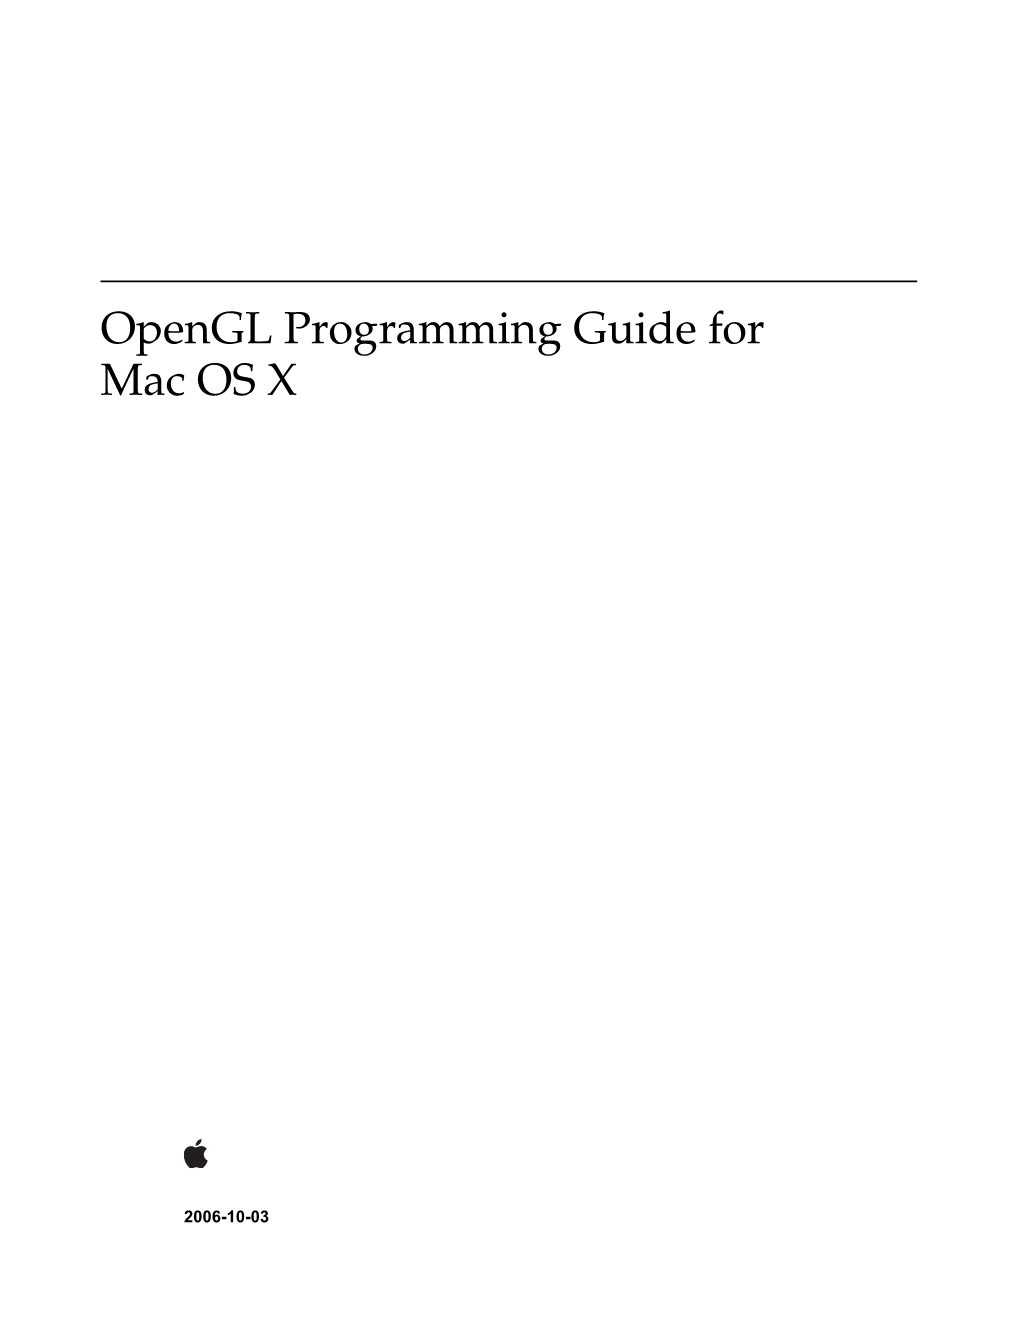 Opengl Programming Guide for Mac OS X